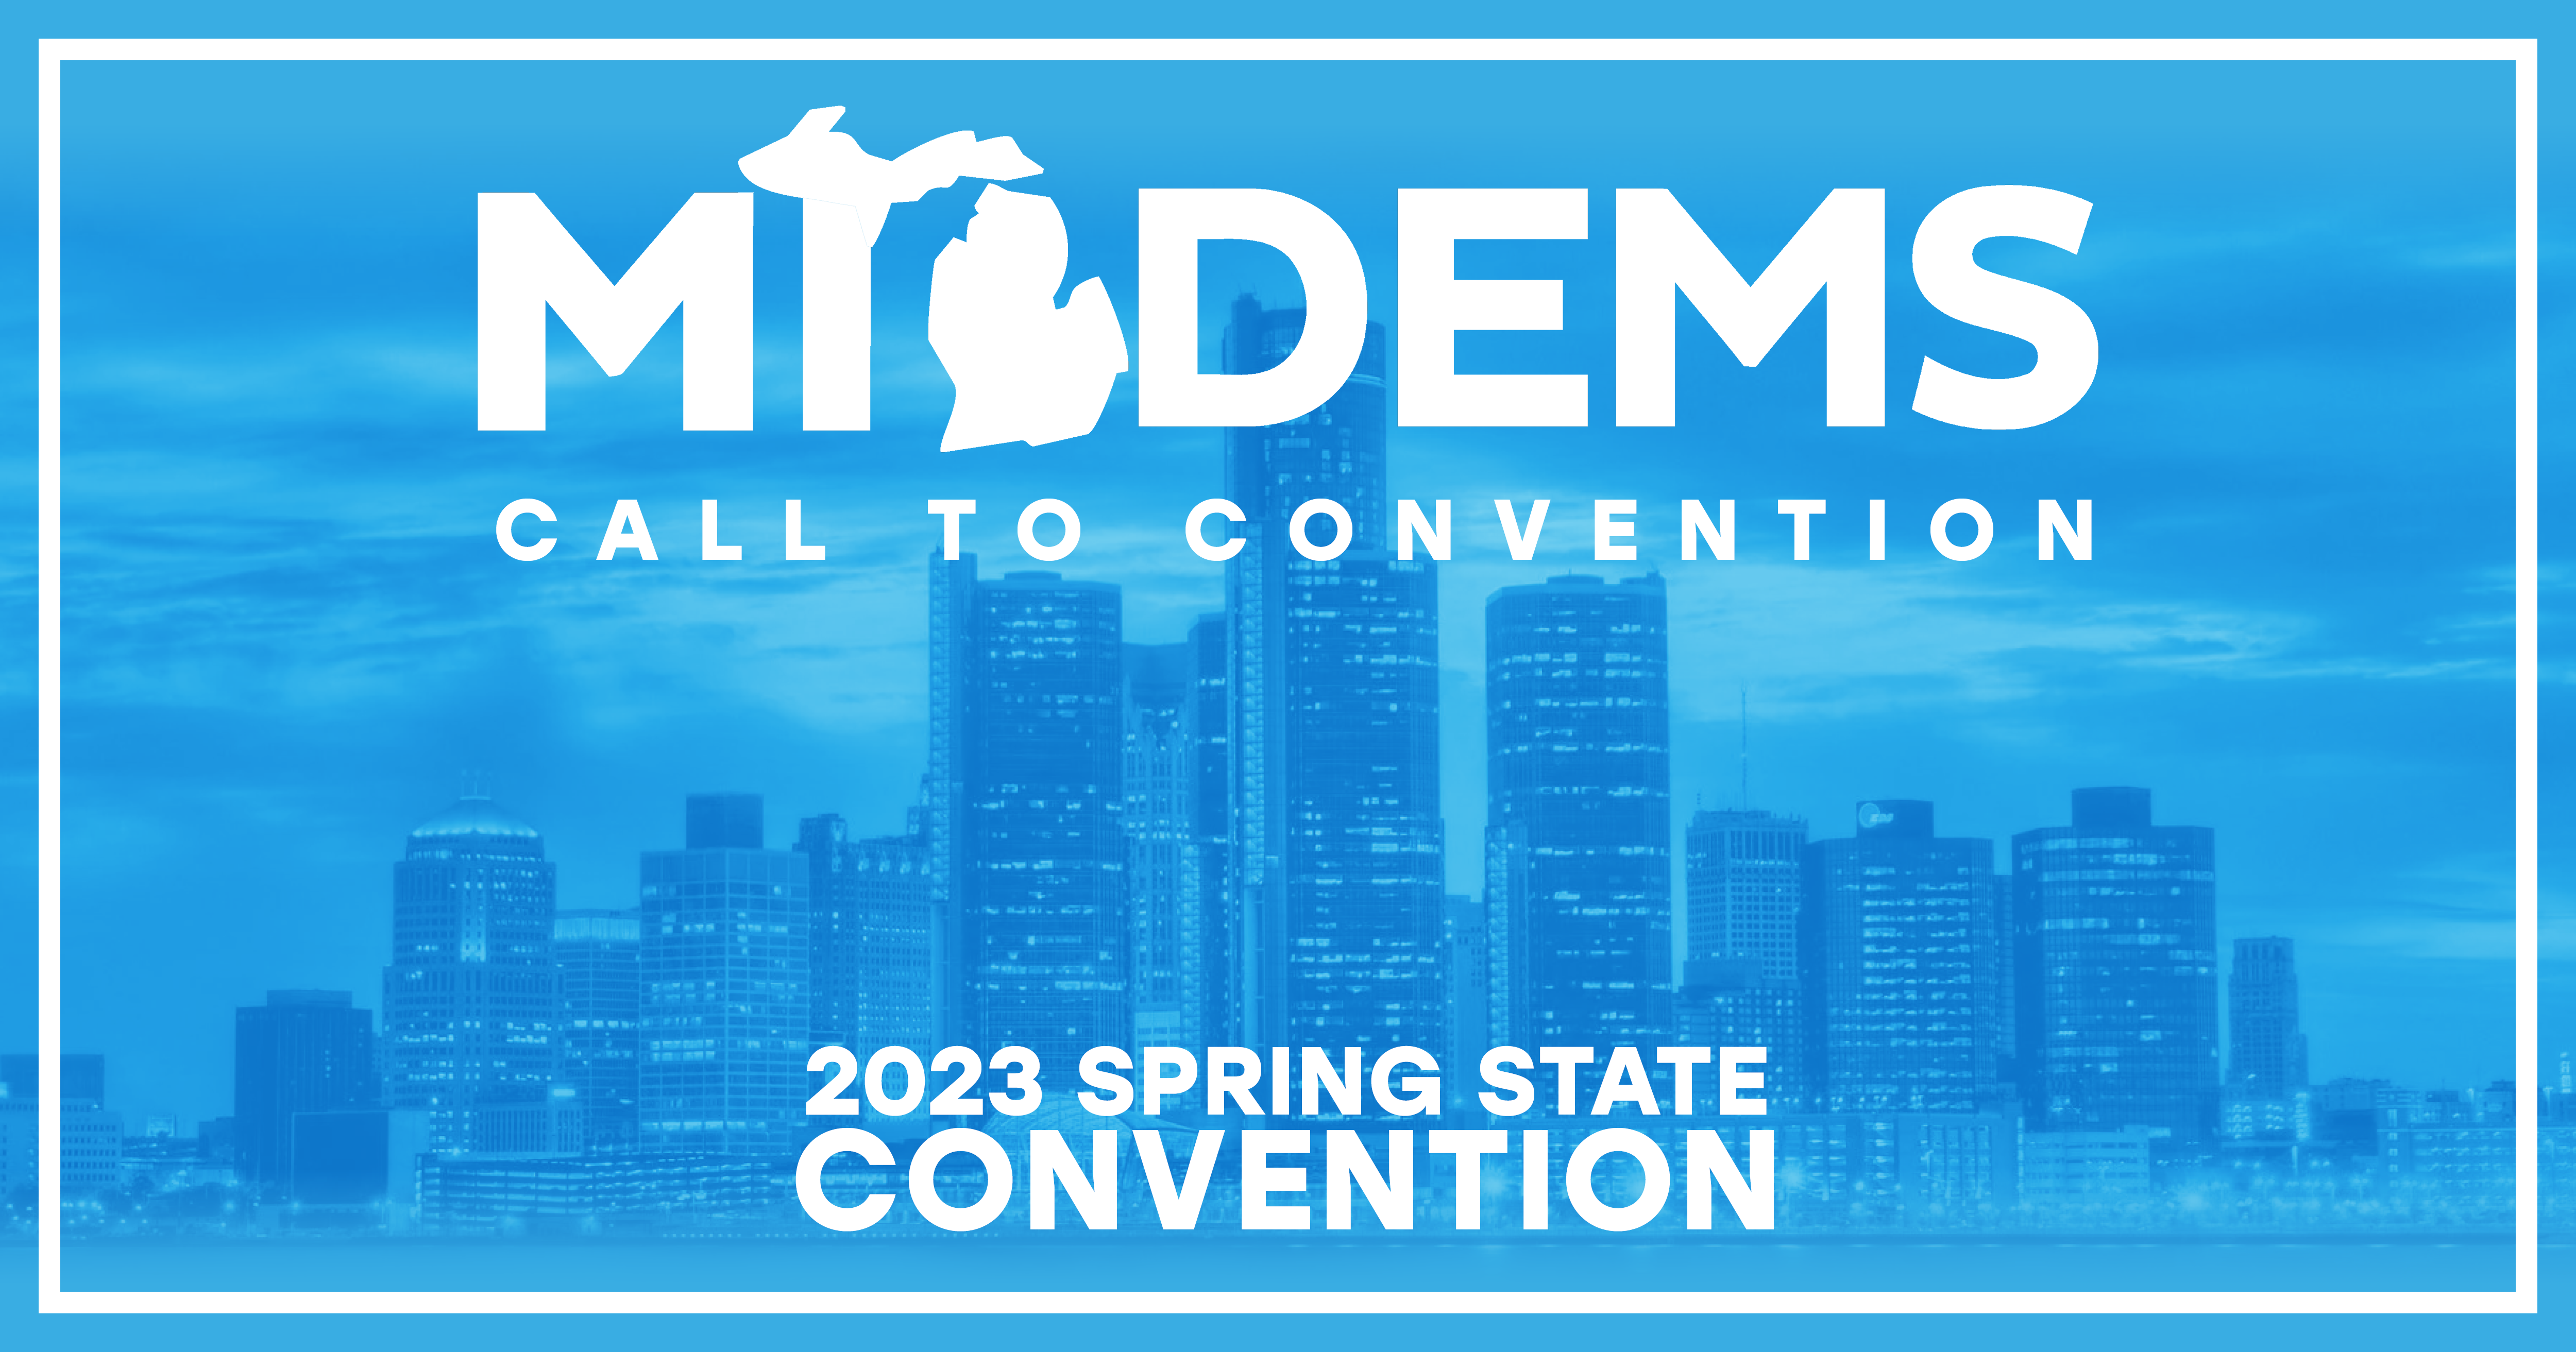 et details and sign up for "MDP's 2023 Spring Convention" hosted by Michigan Democratic Party